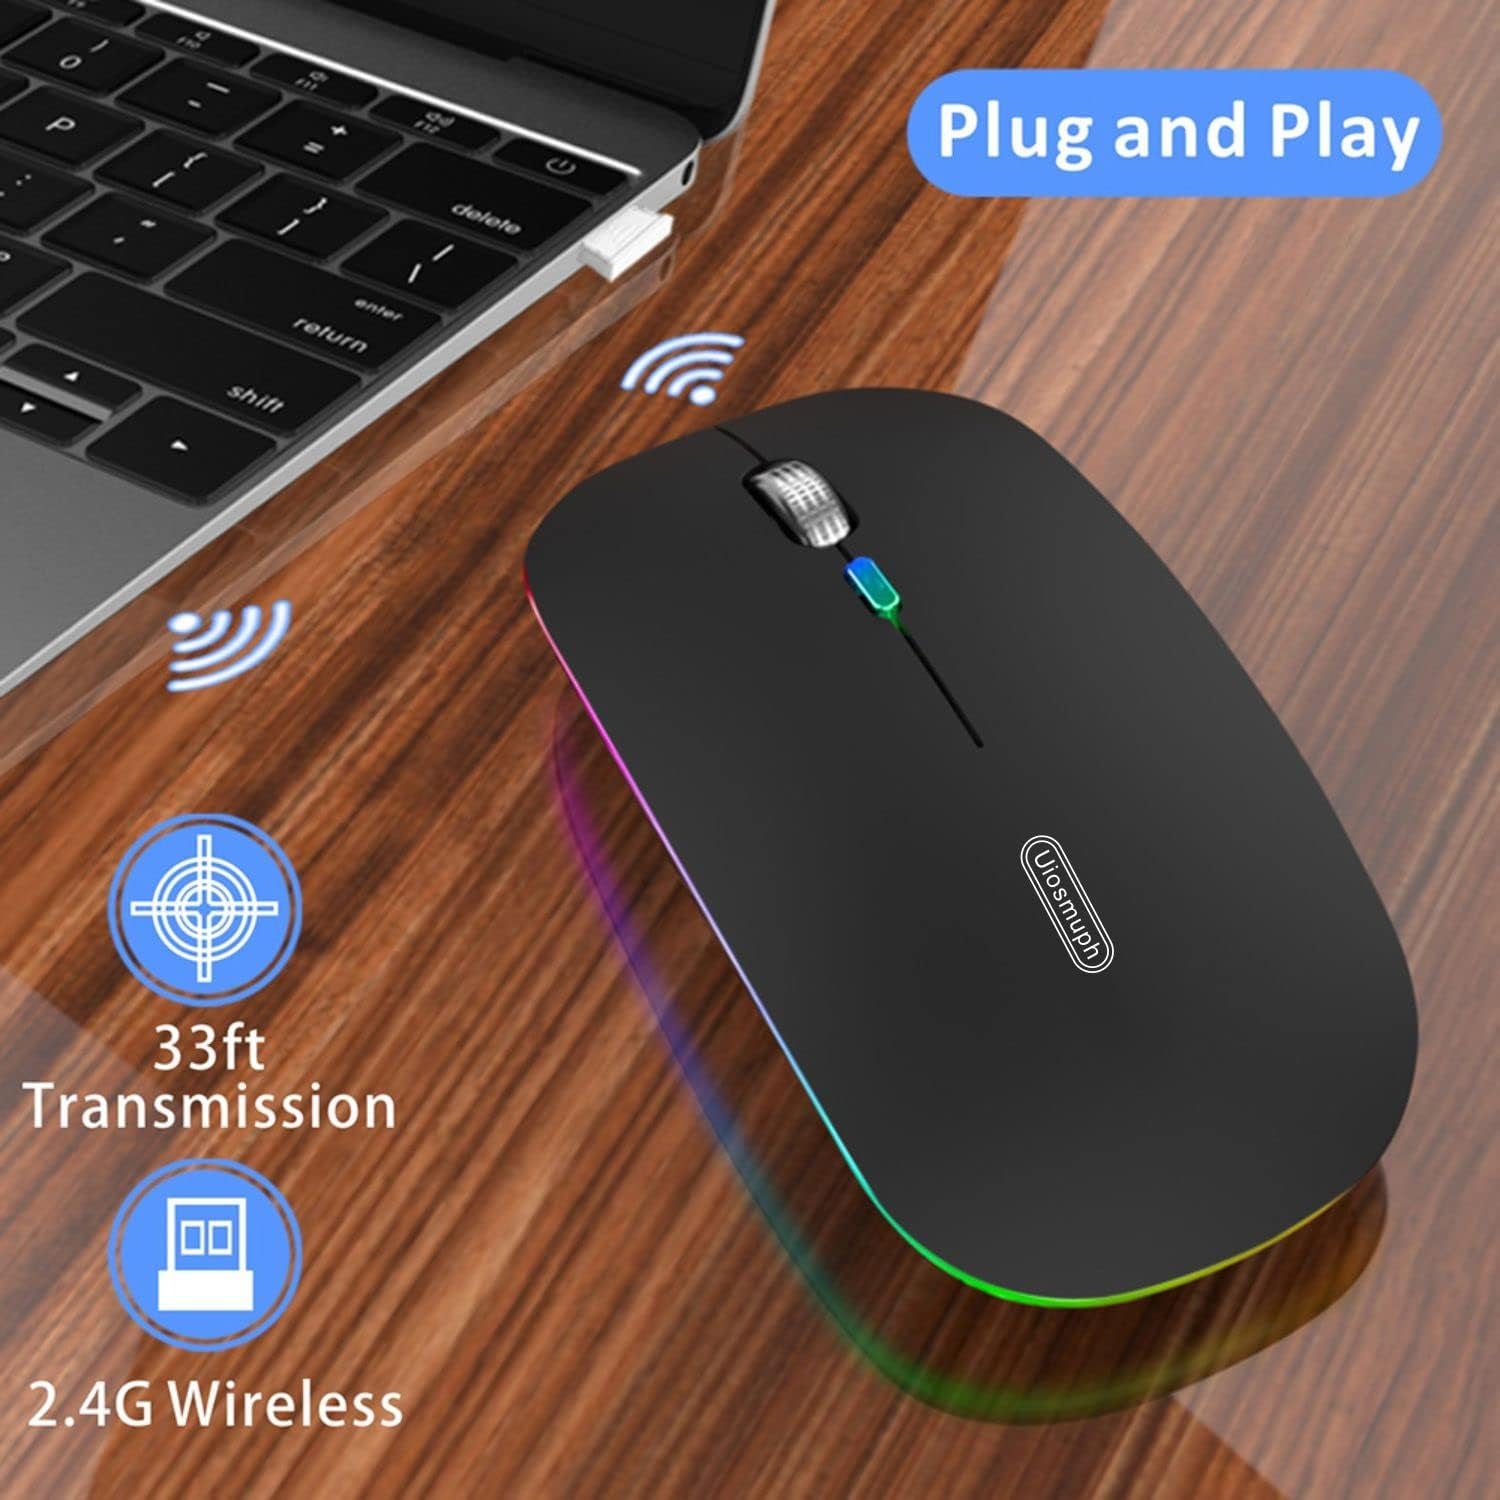 LED Wireless Mouse, G12 Slim Rechargeable Wireless Silent Mouse, 2.4G Portable USB Optical Wireless Computer Mice with USB Receiver and Type C Adapter (Matte Black)